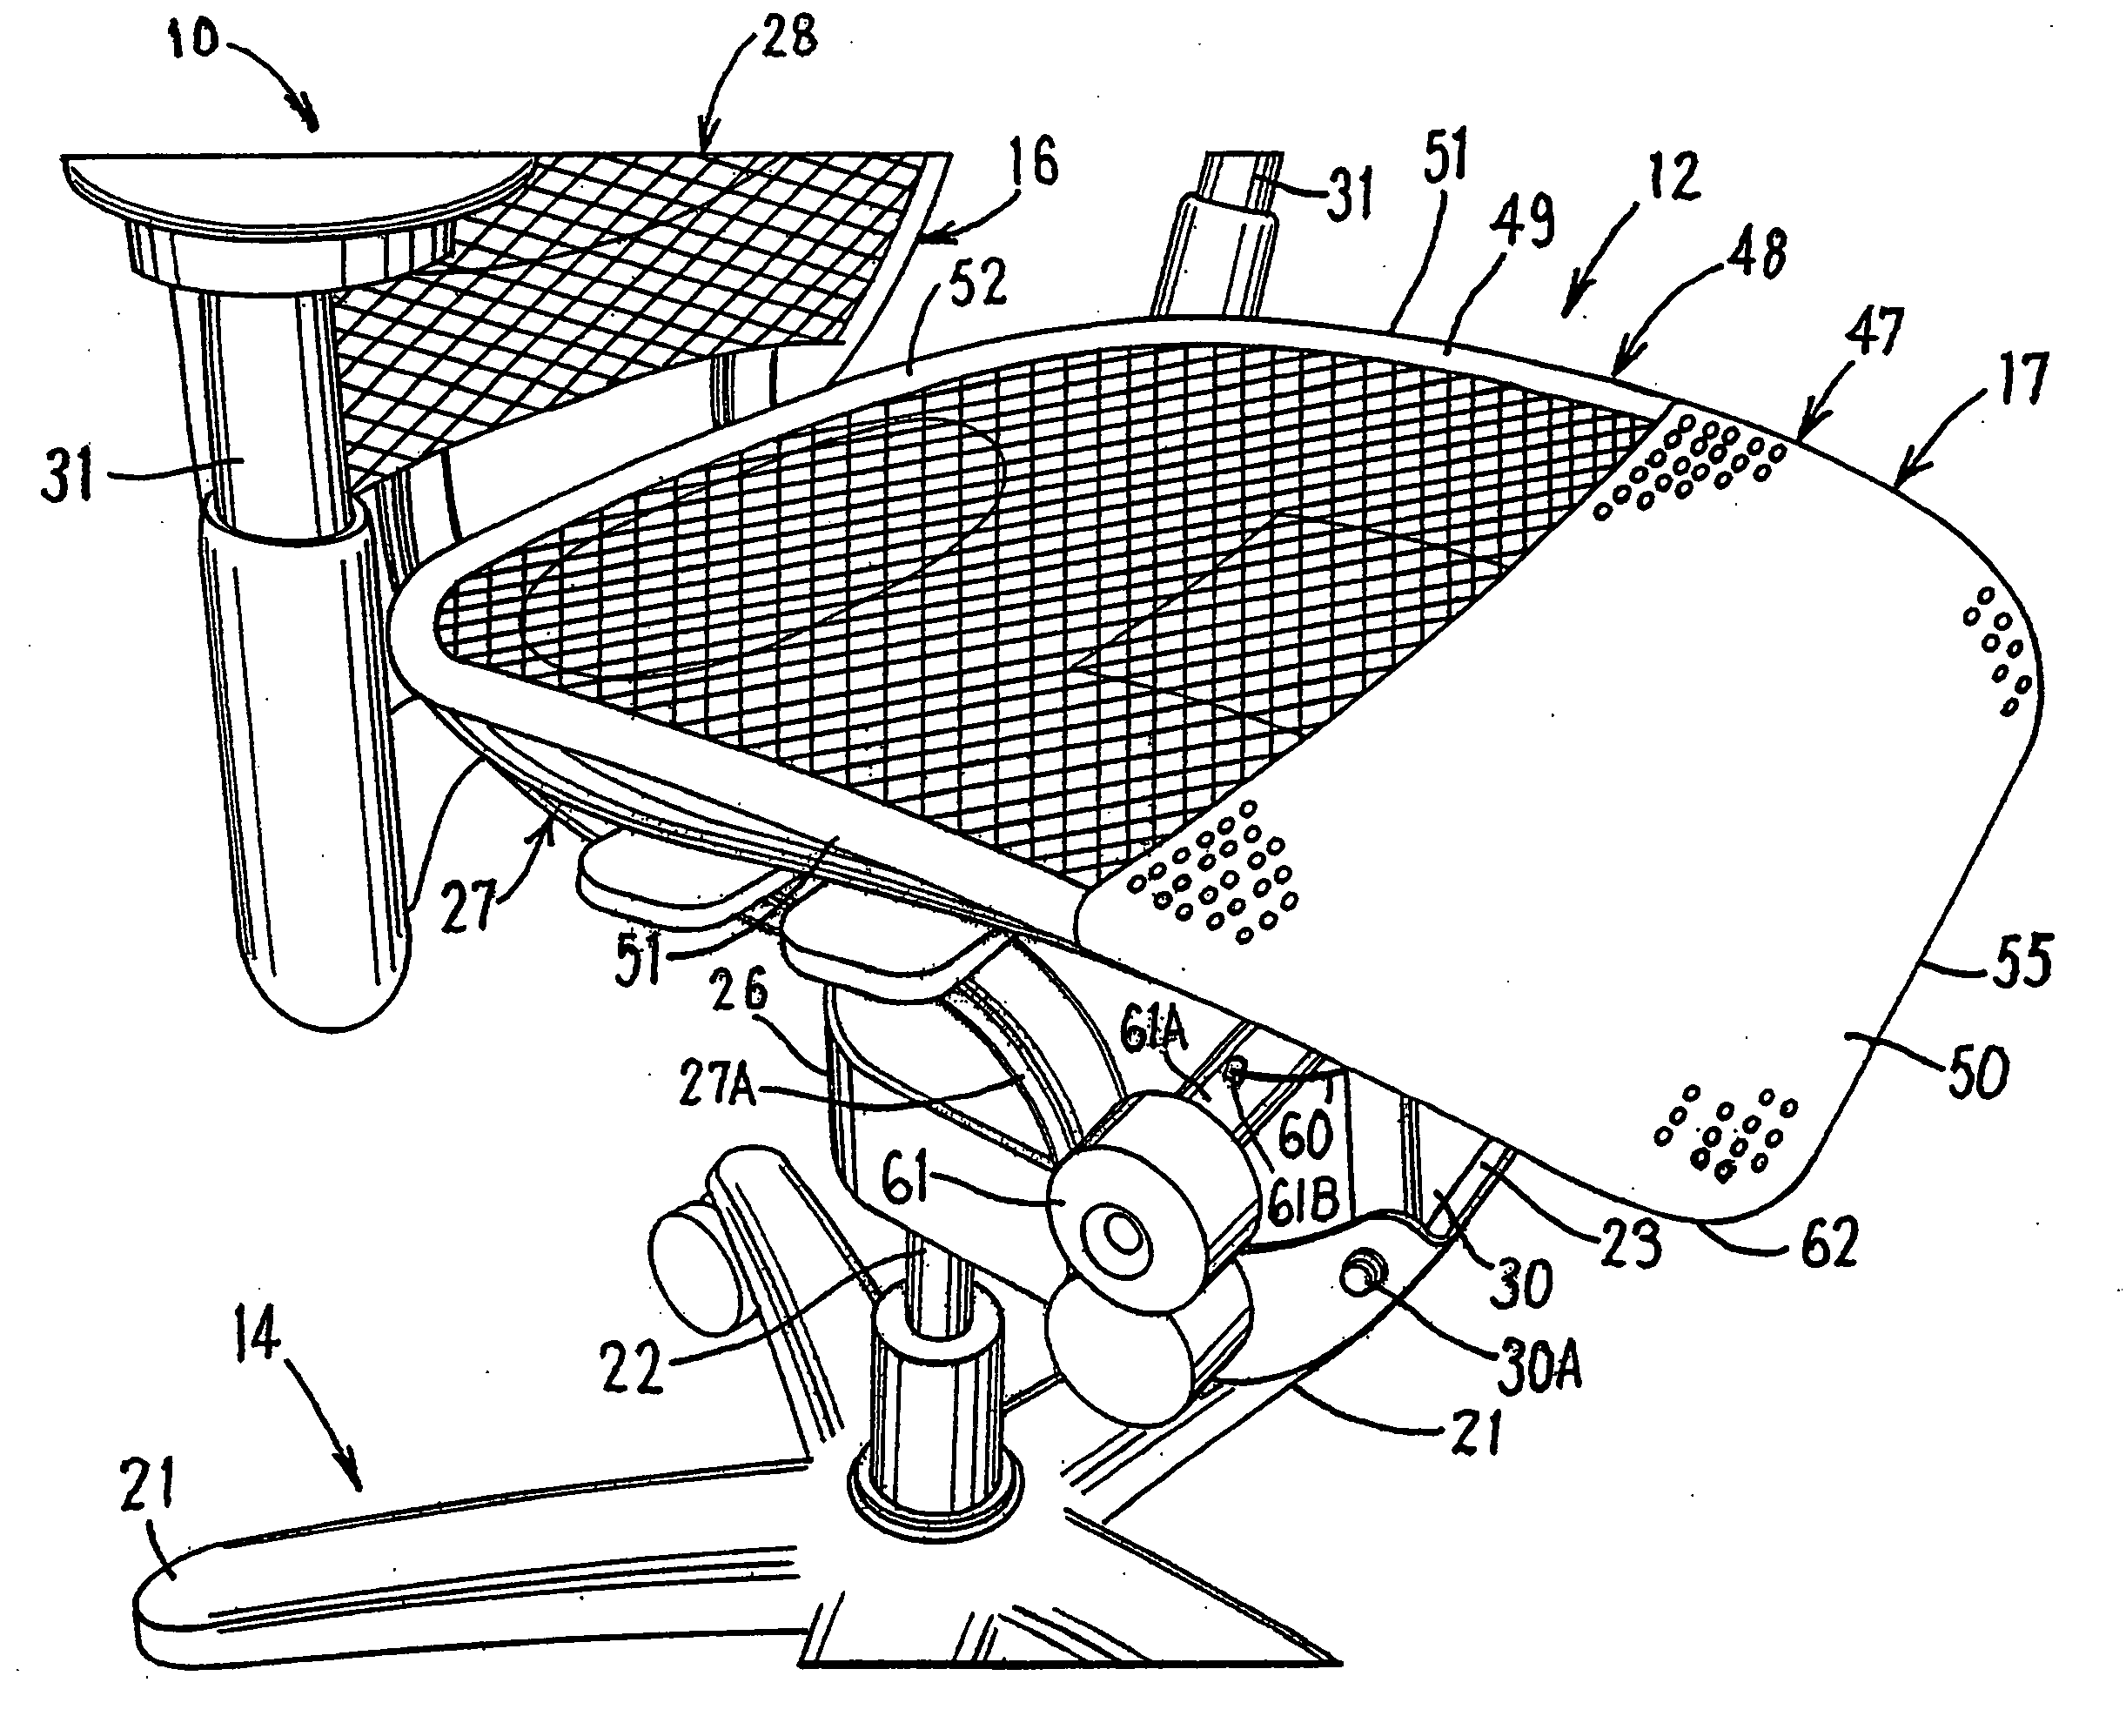 Chair having a suspension seat assembly